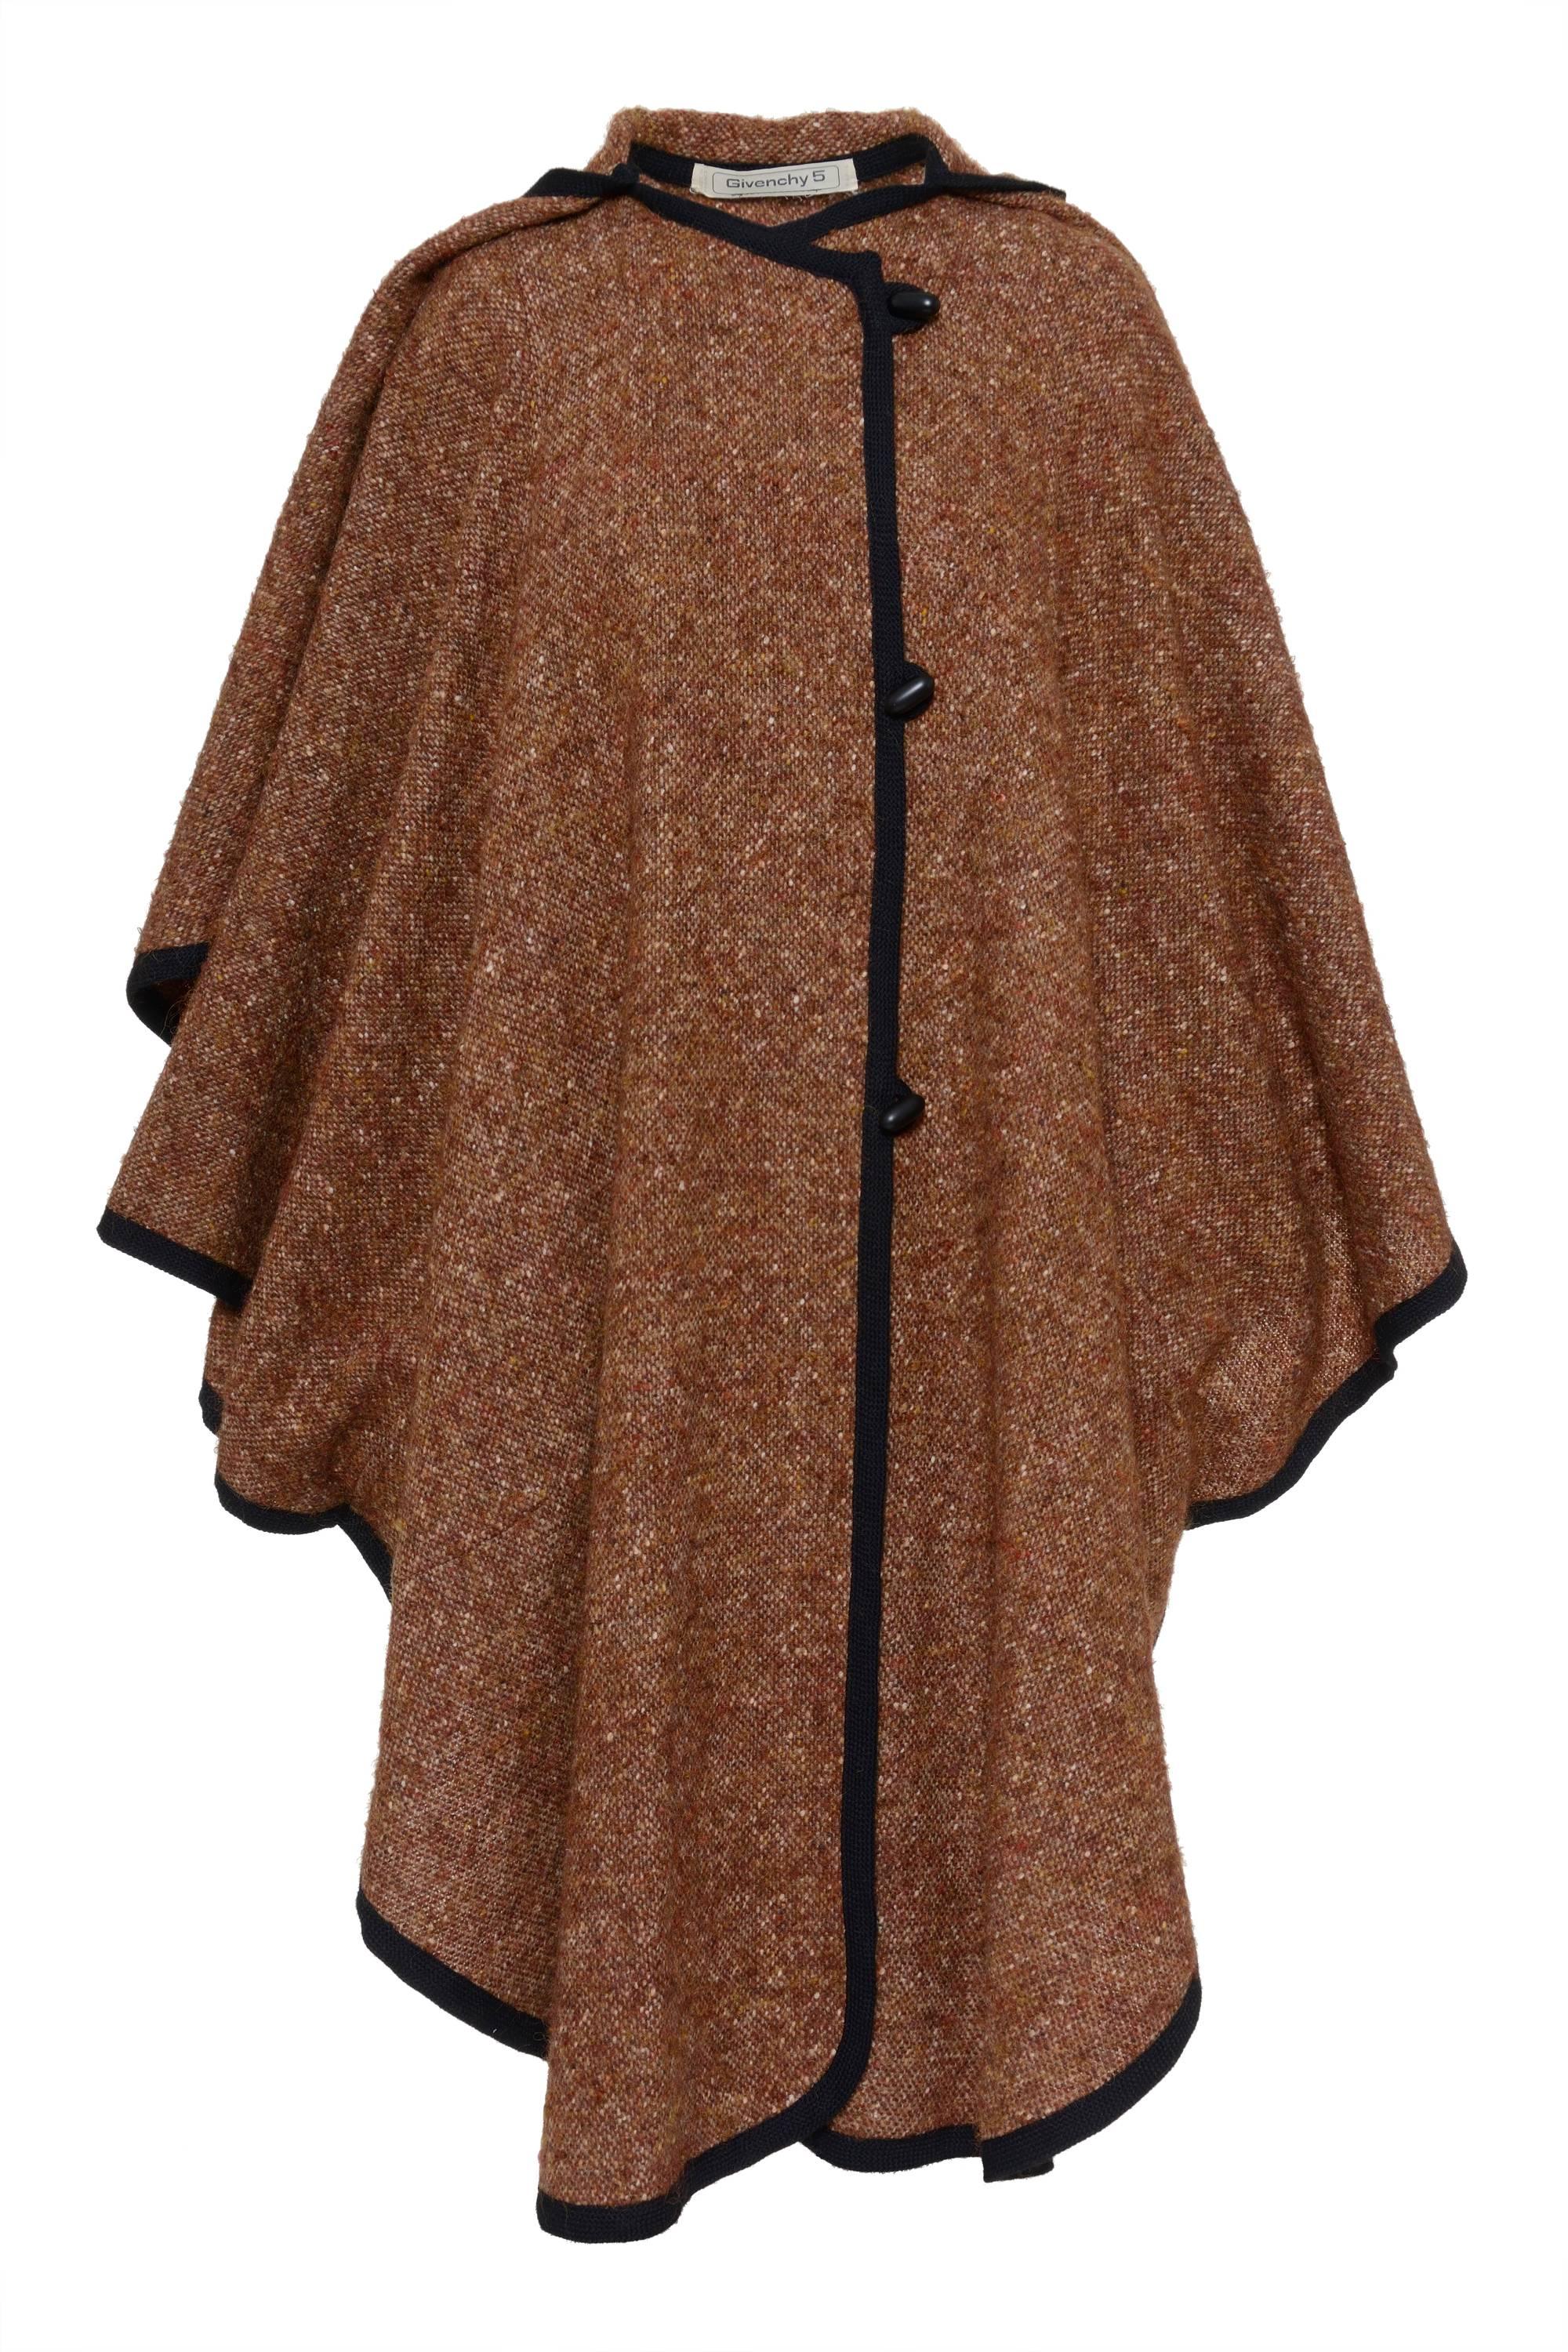 This 1980s beautiful brown weave wool cape by GIVENCHY 5 has a black hem, circular neckline, two front seam pockets hidden in a long dart for adapt it to the body shape, button and loop closure, and a little cape over with a decorative tassel. Made